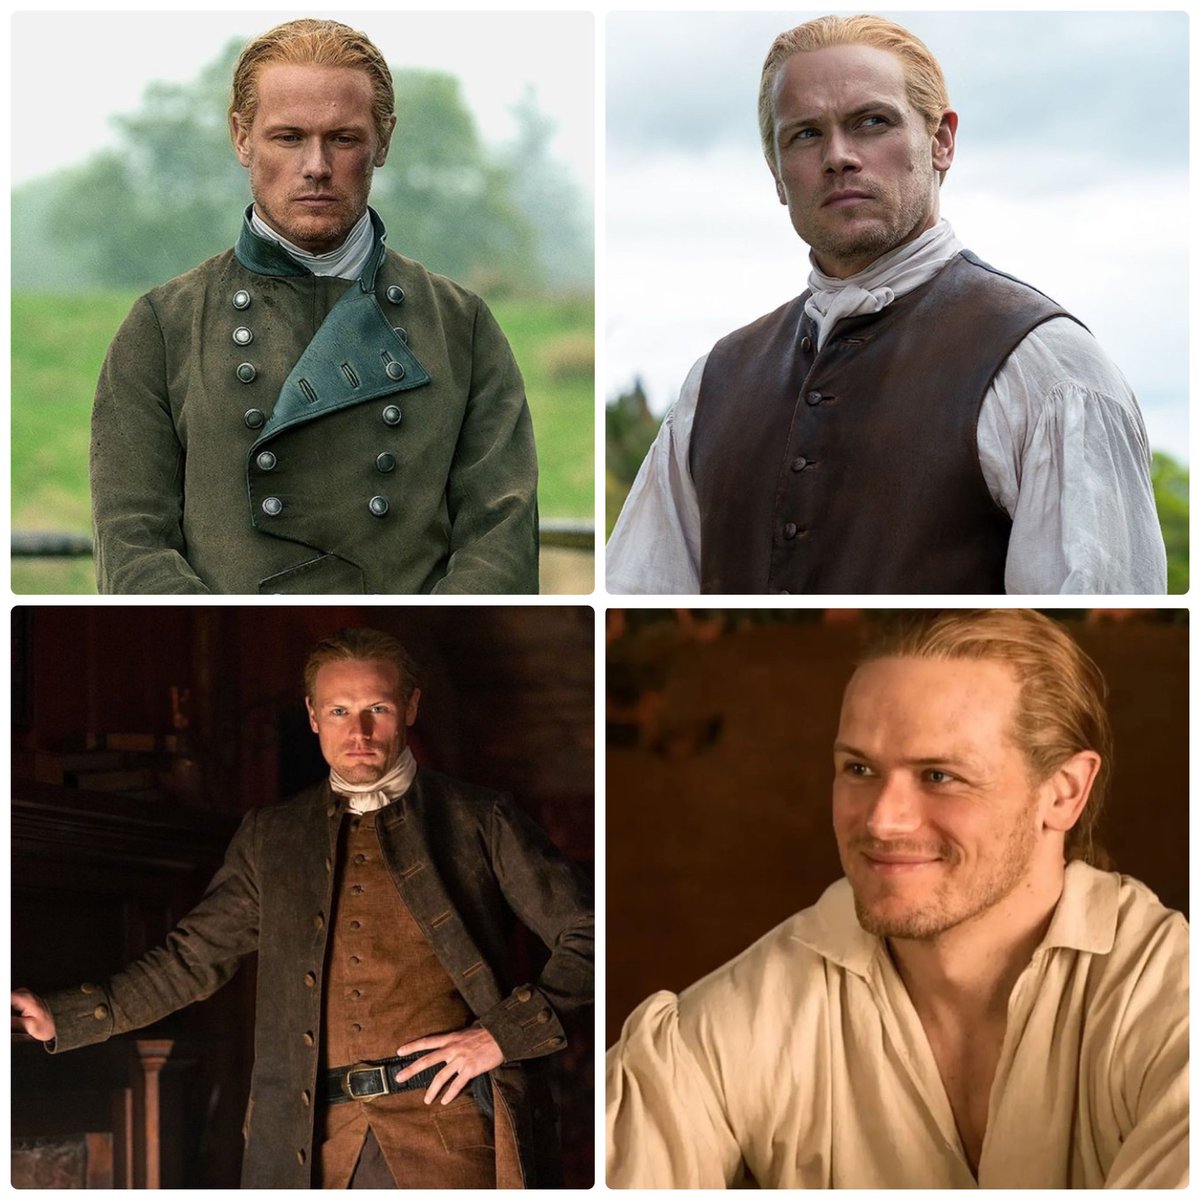 💙Happy Wednesday with some of the various styles of Jamie this season! Do you have a favorite? #SamHeughan #JamieFraser #Outlander